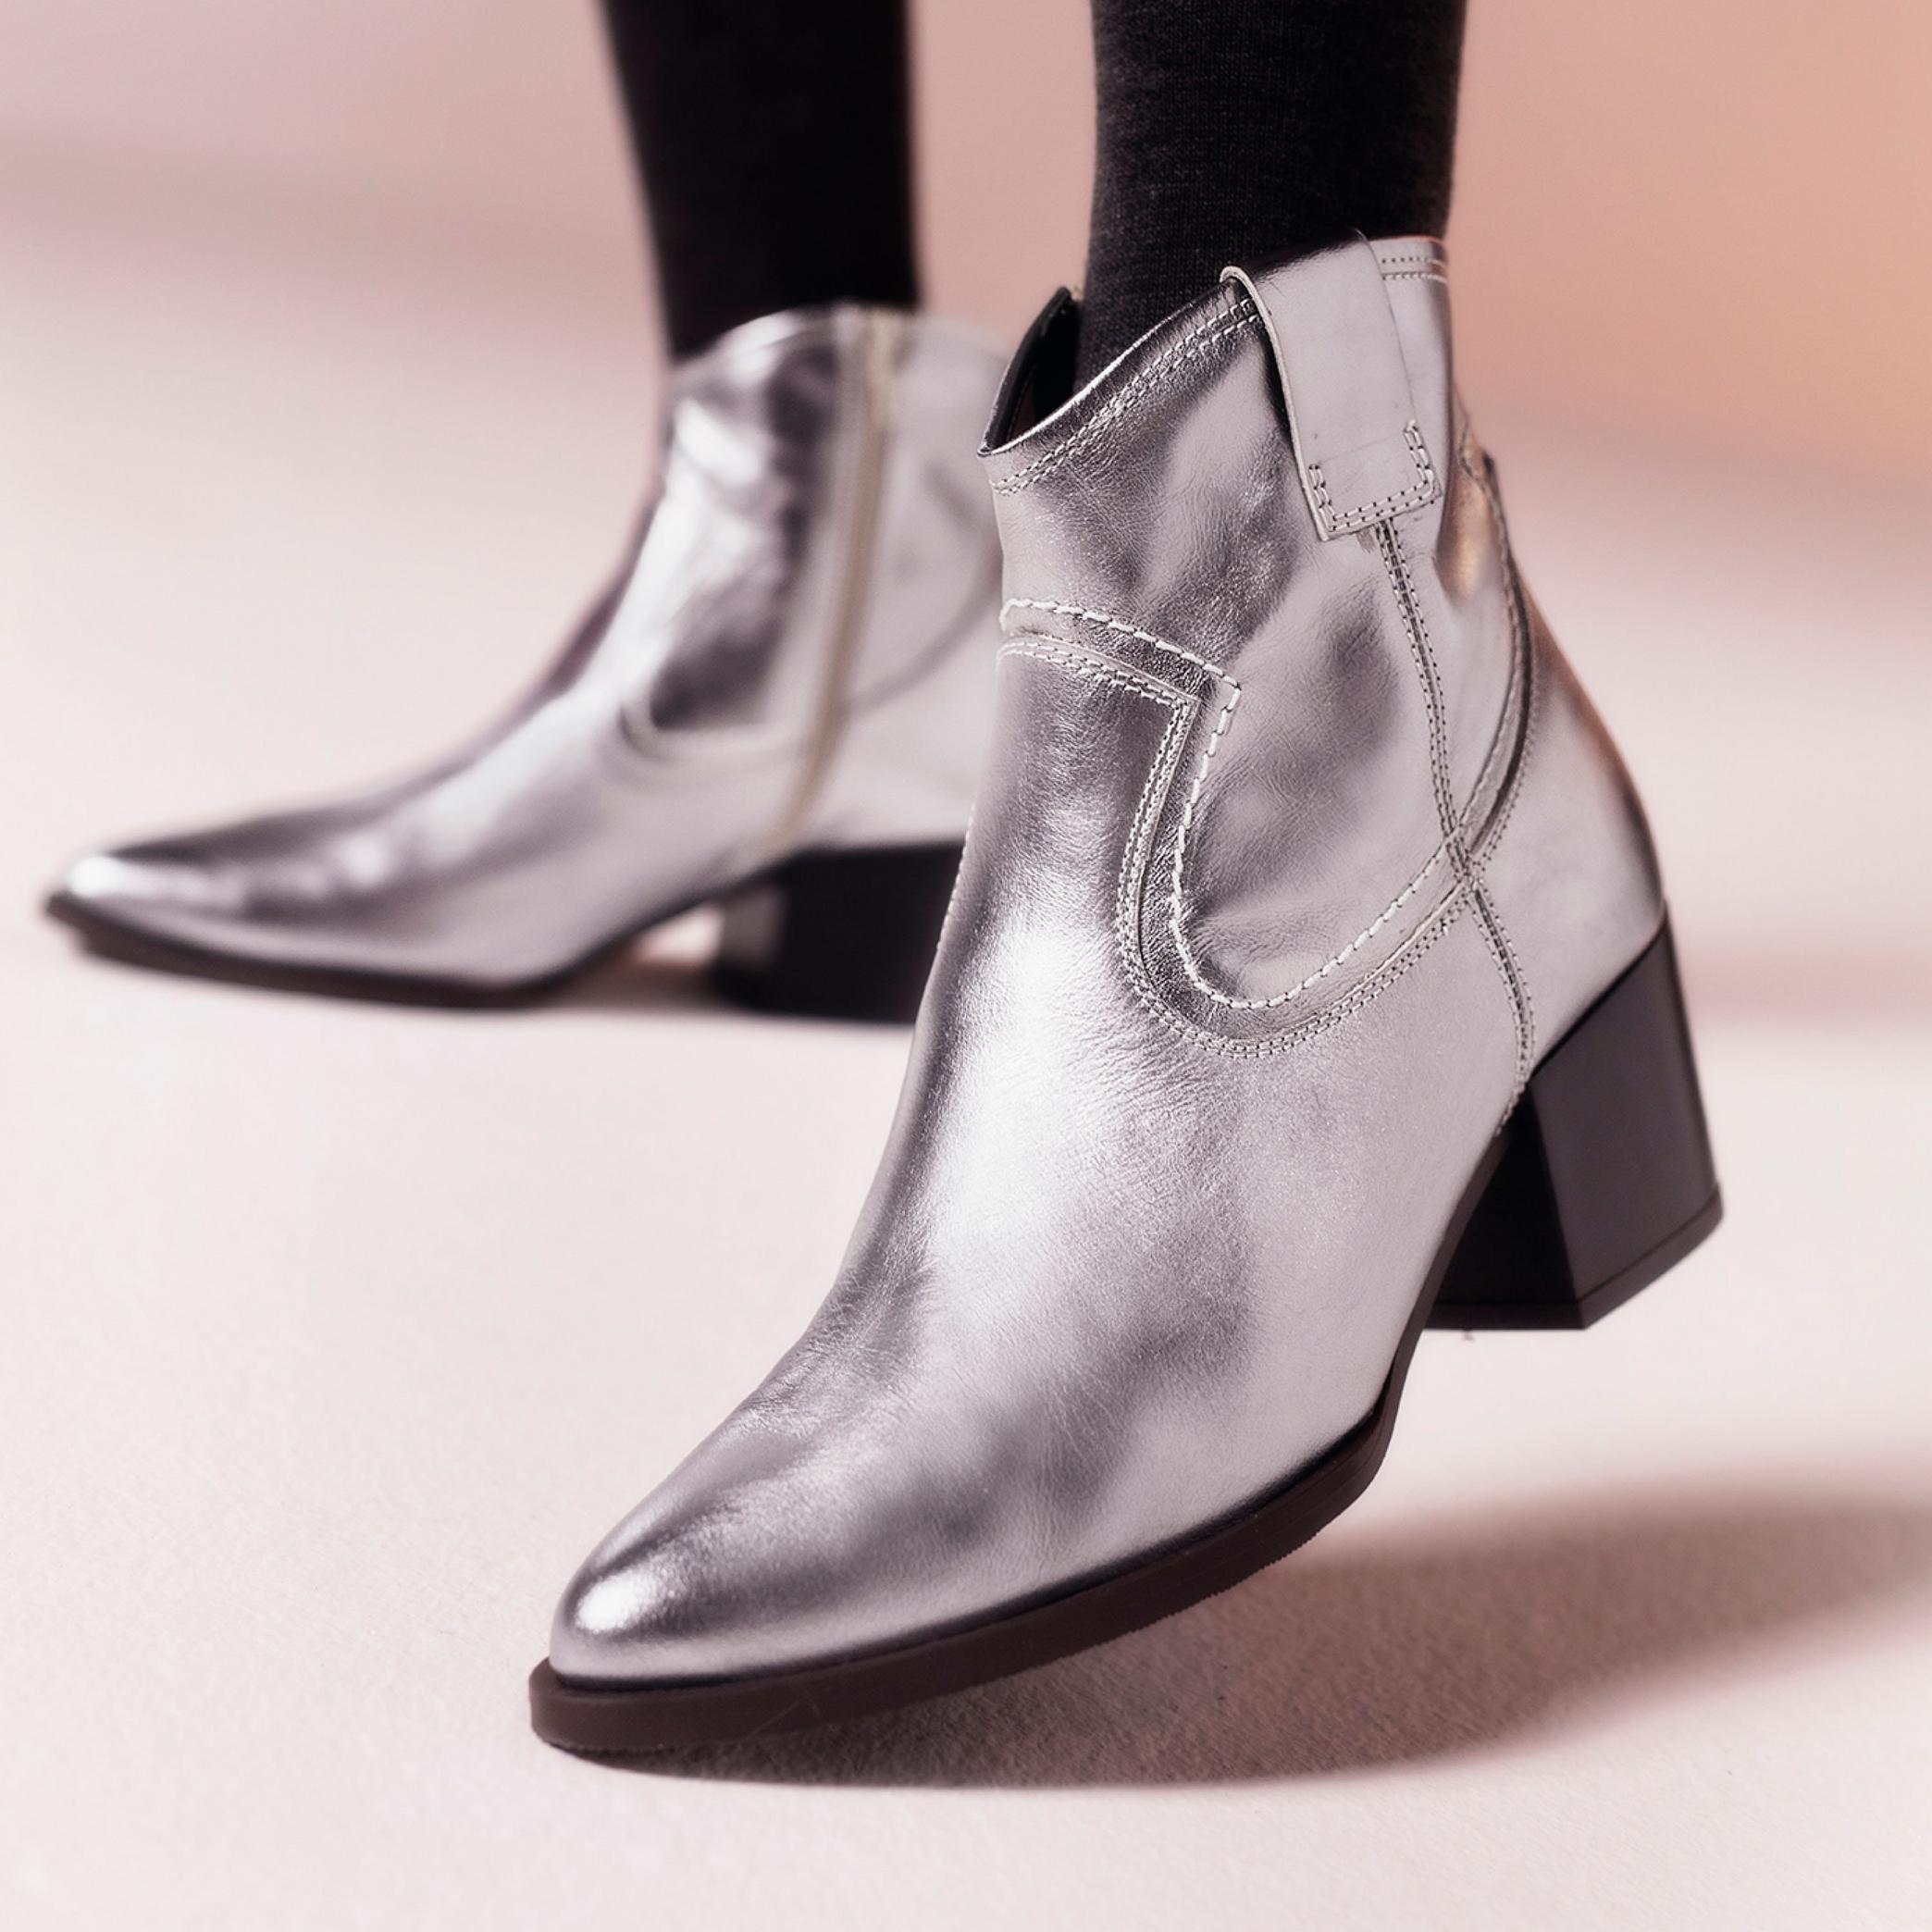 Elder Rae Silver Leather Ankle Boots, view 2 of 8